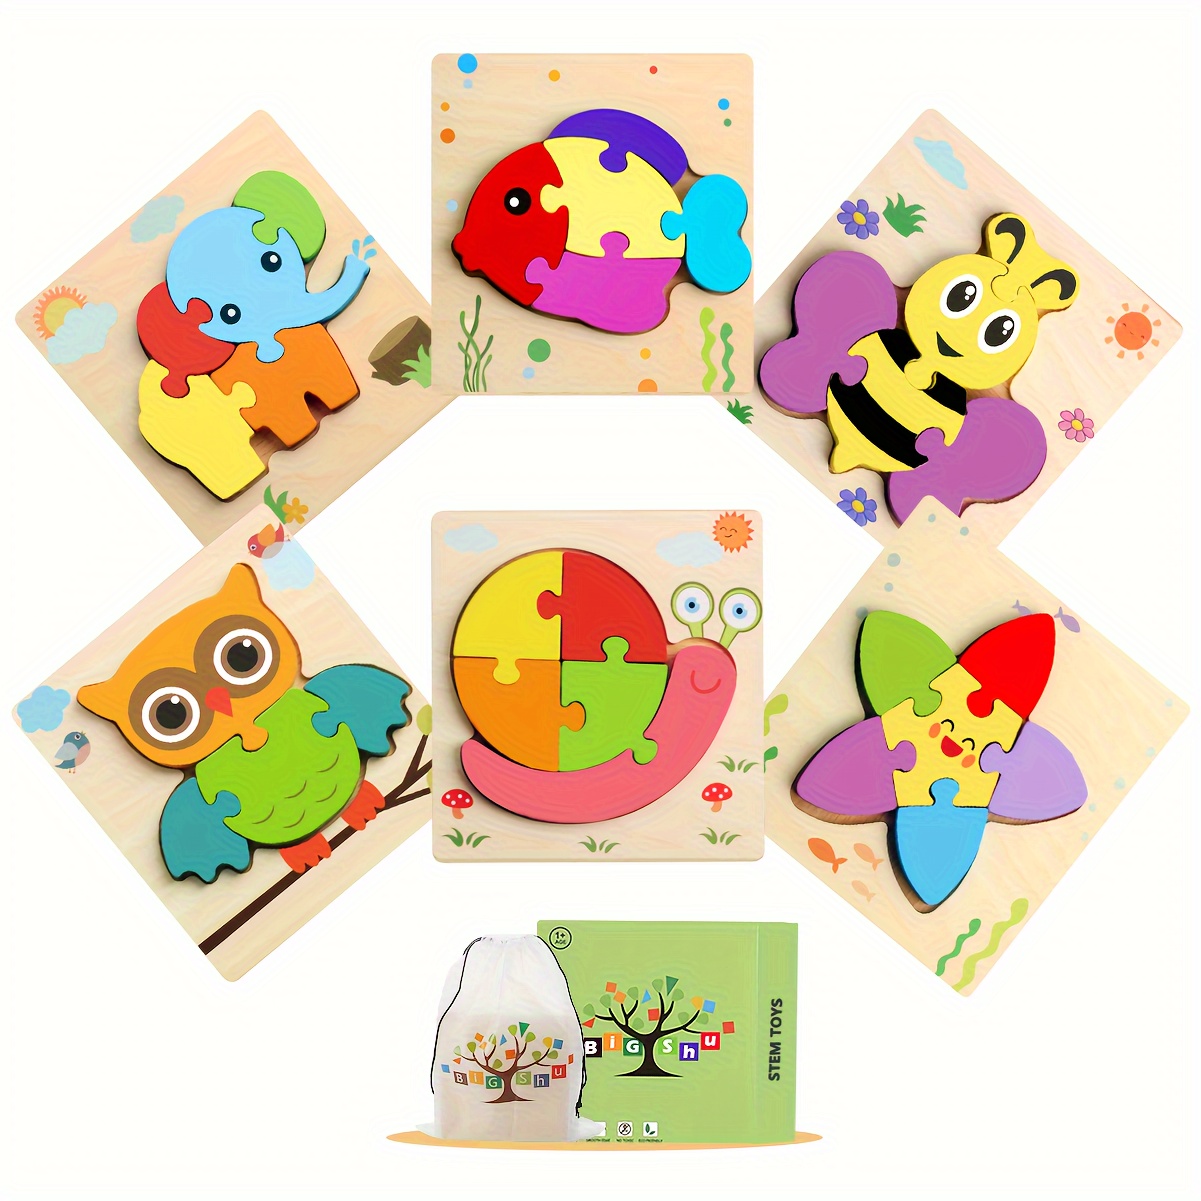 

Wooden Gifts For Children Are Suitable For Boys And Girls Aged 1-3, Animal Jigsaw Montessori Toys, Christmas And Birthday Gifts For Learning And Education.